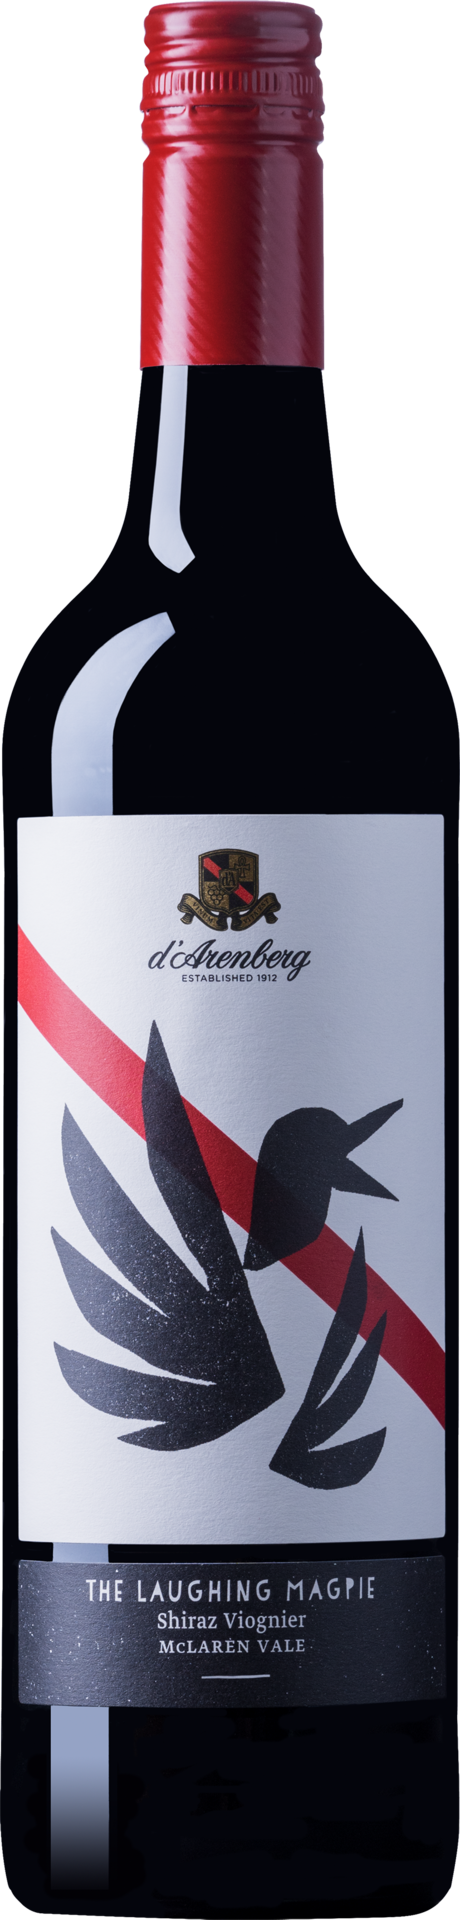 d'Arenberg The Laughing Magpie - 2018